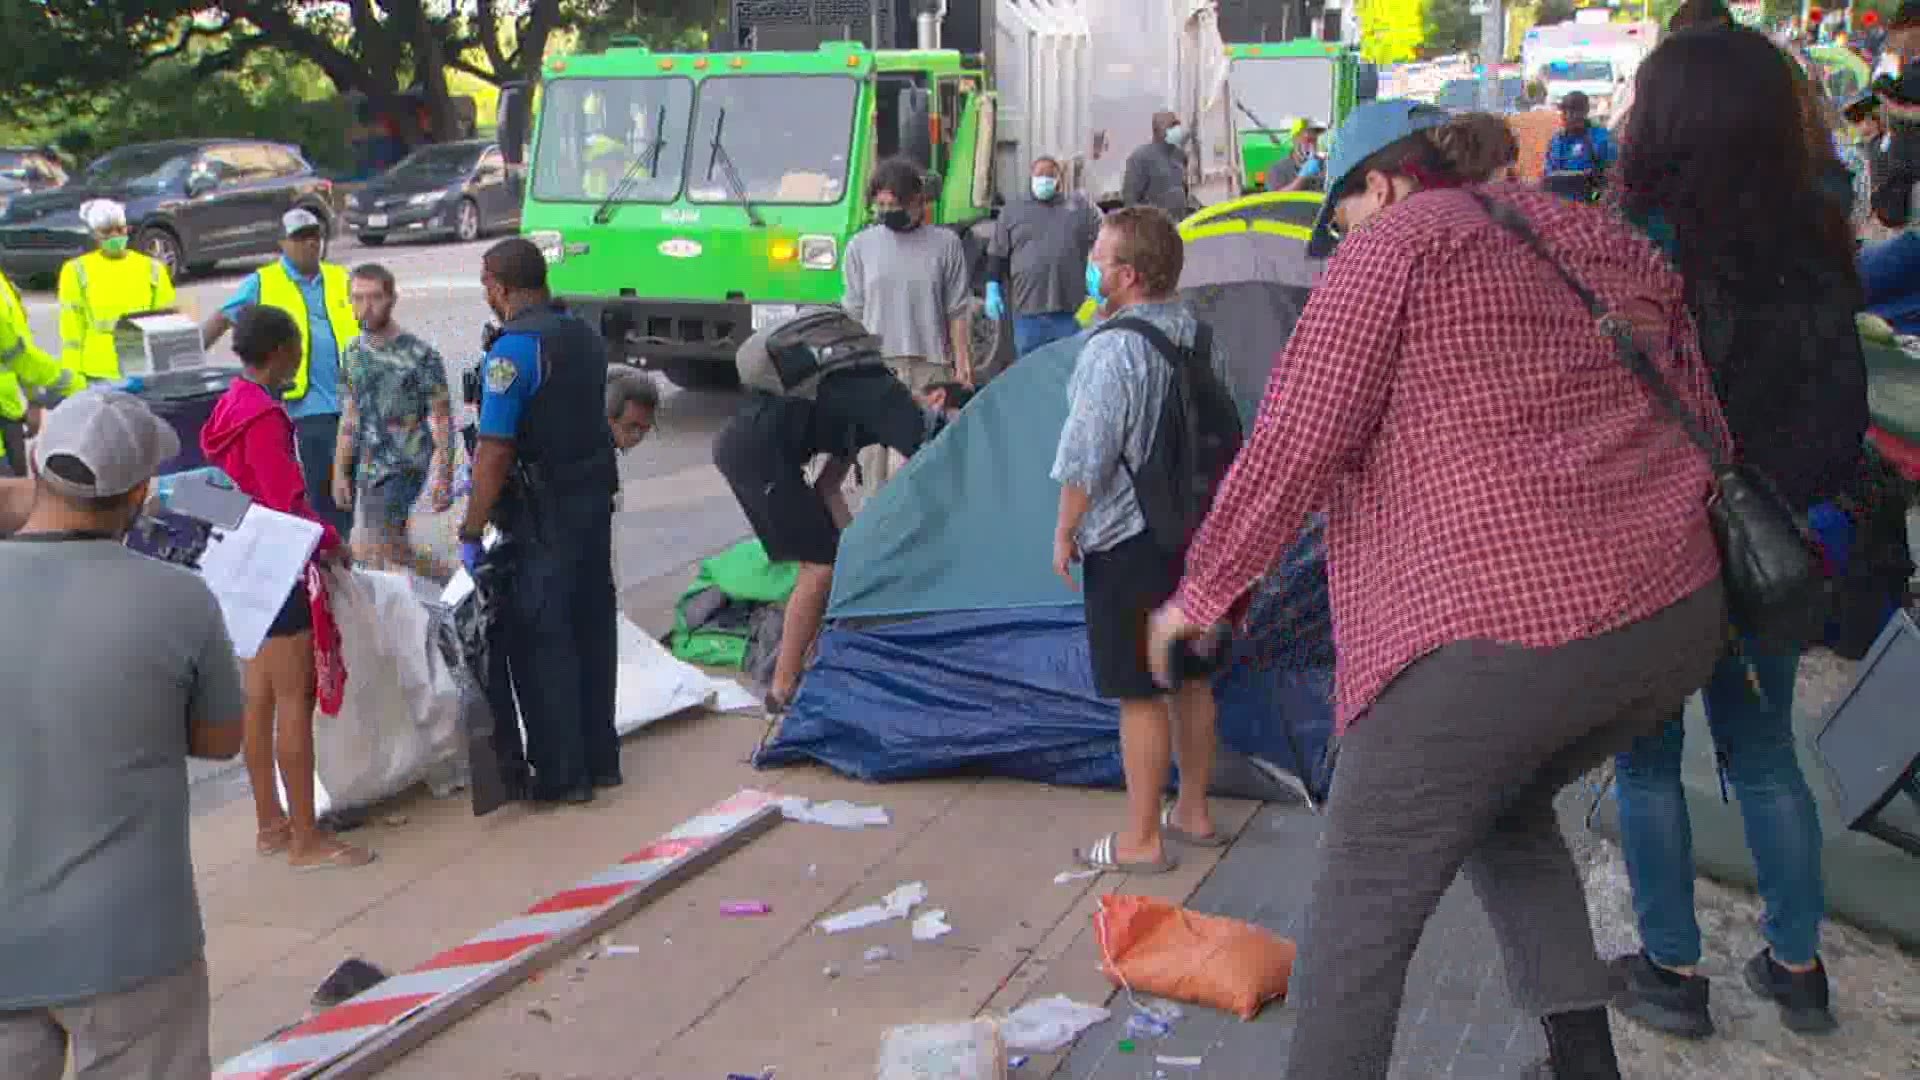 People clashed with crews cleaning up homeless tents outside Austin City Hall Monday.